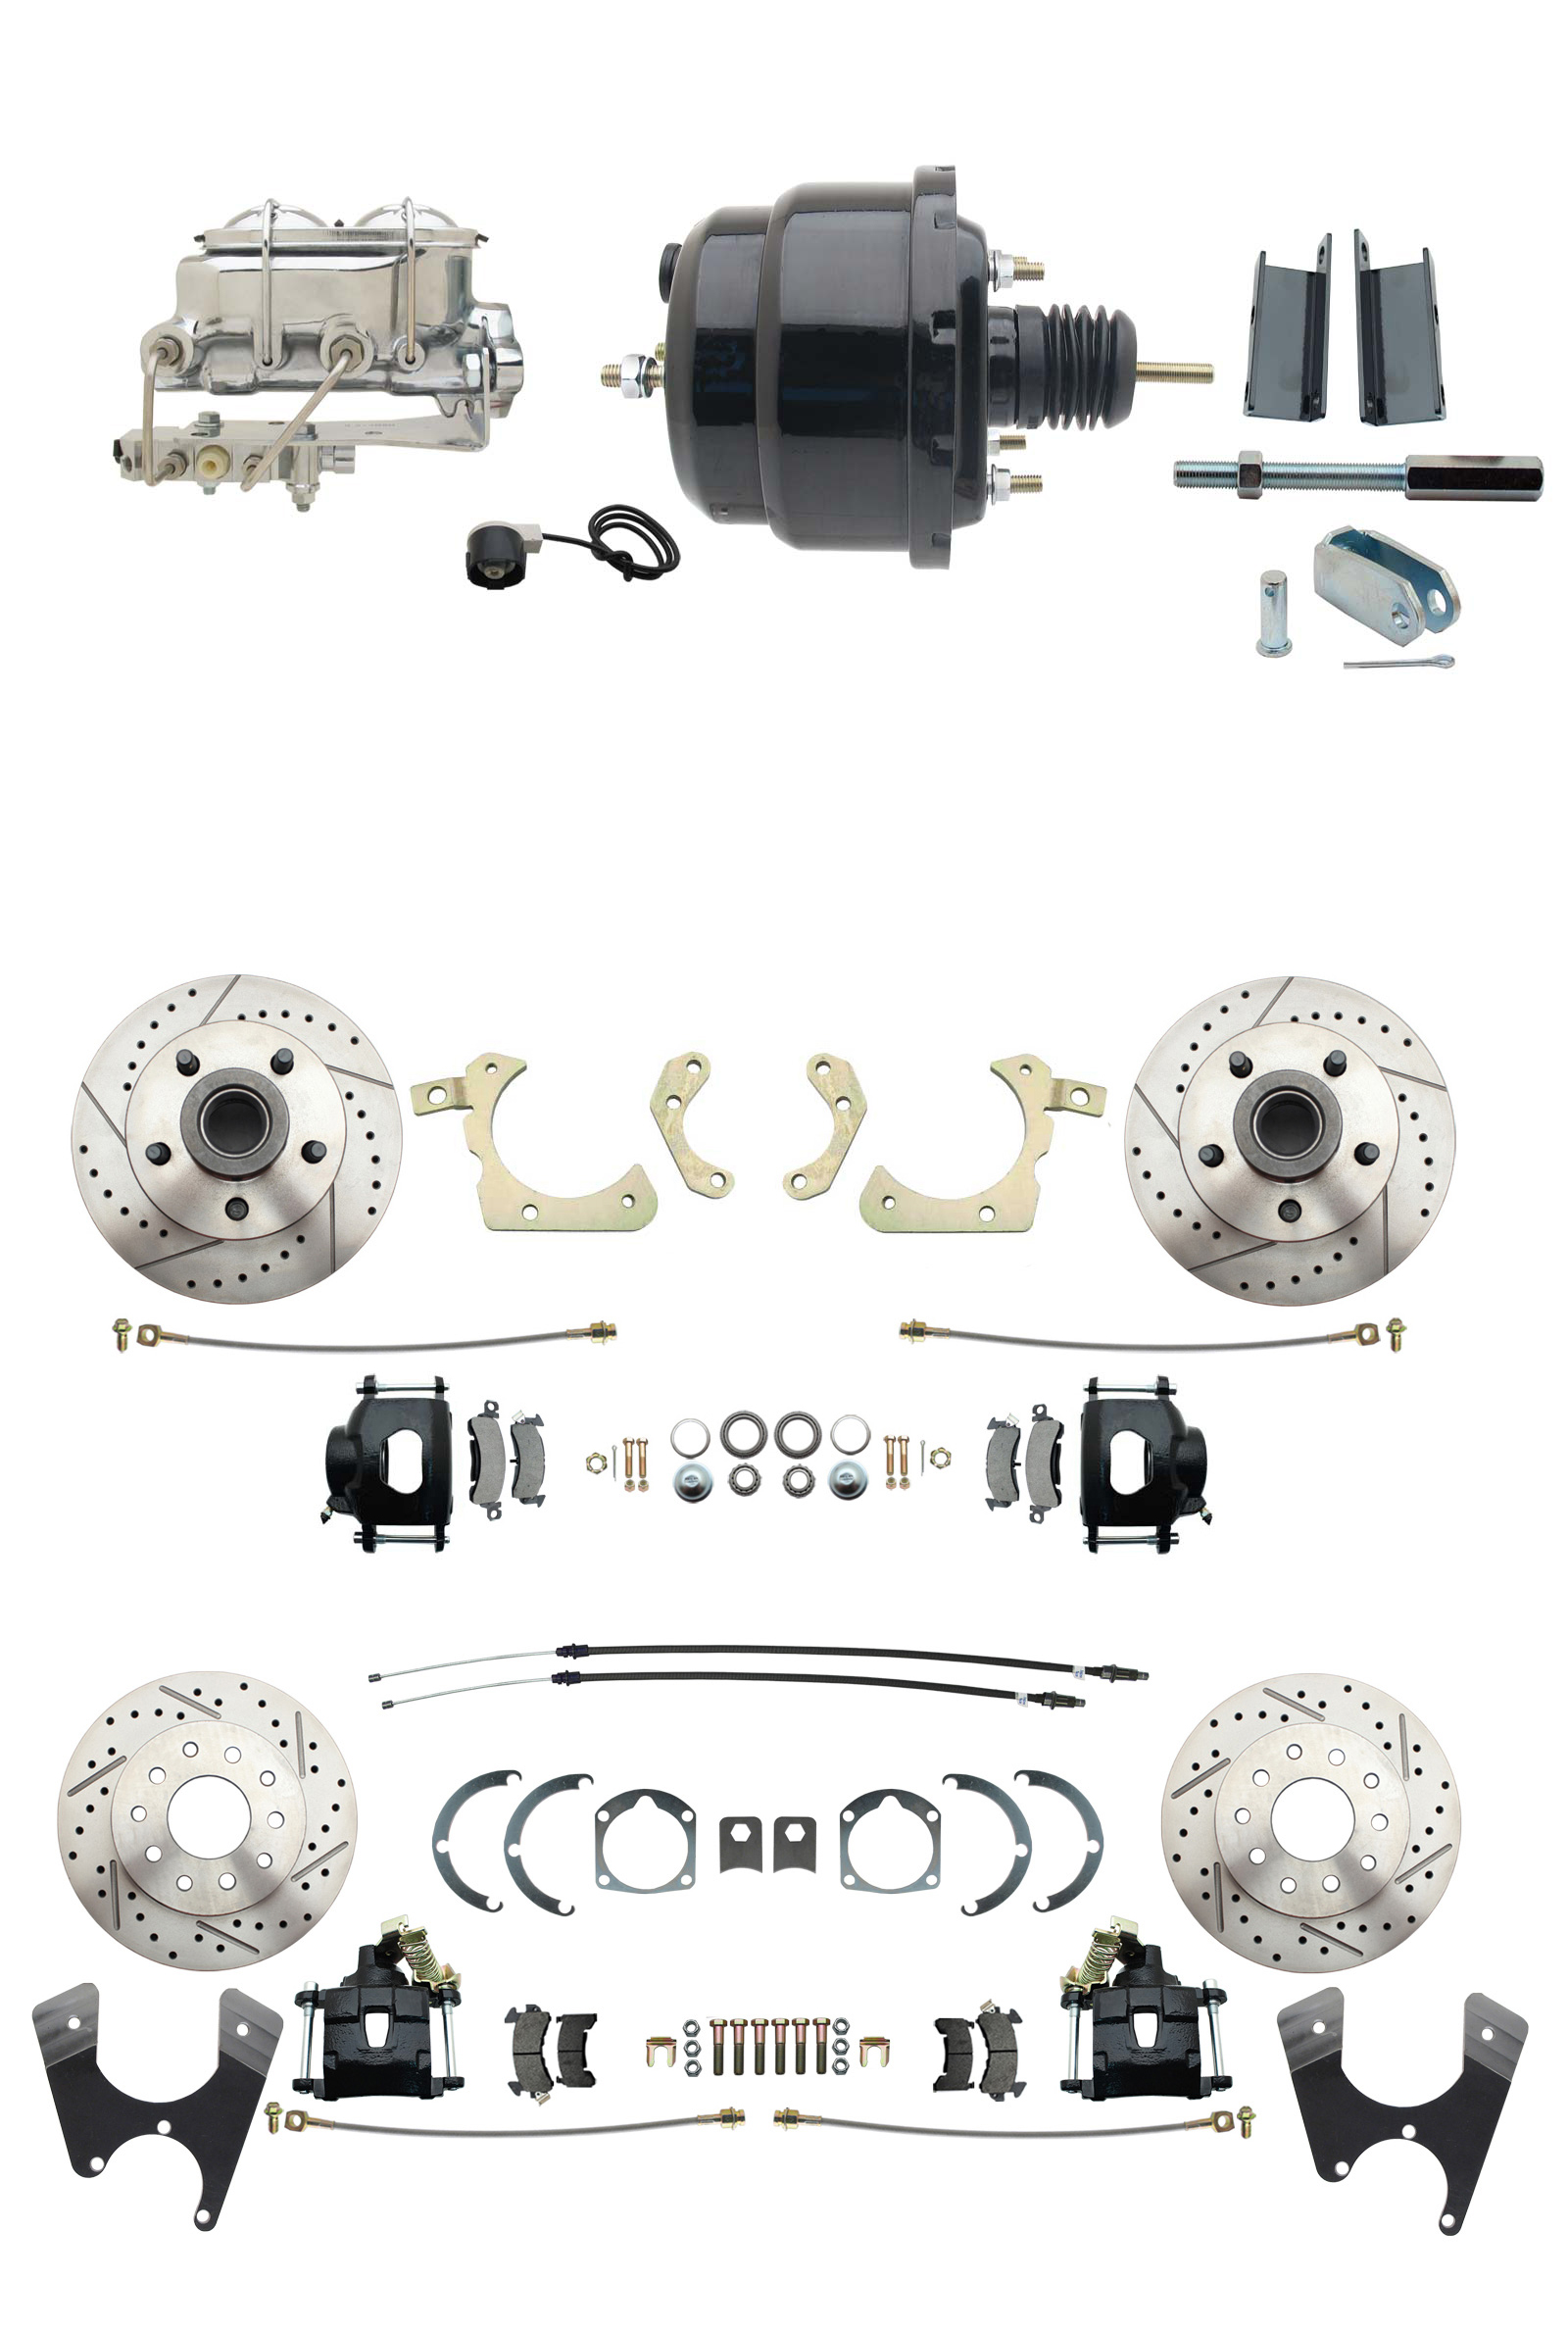 1955-1958 GM Full Size Front & Rear Power Disc Brake Kit Black Powder Coated Calipers Drilled/Slotted Rotors (Impala, Bel Air, Biscayne) & 8 Dual Powder Coated Black Booster Conversion Kit W/ Chrome Master Cylinder Bott